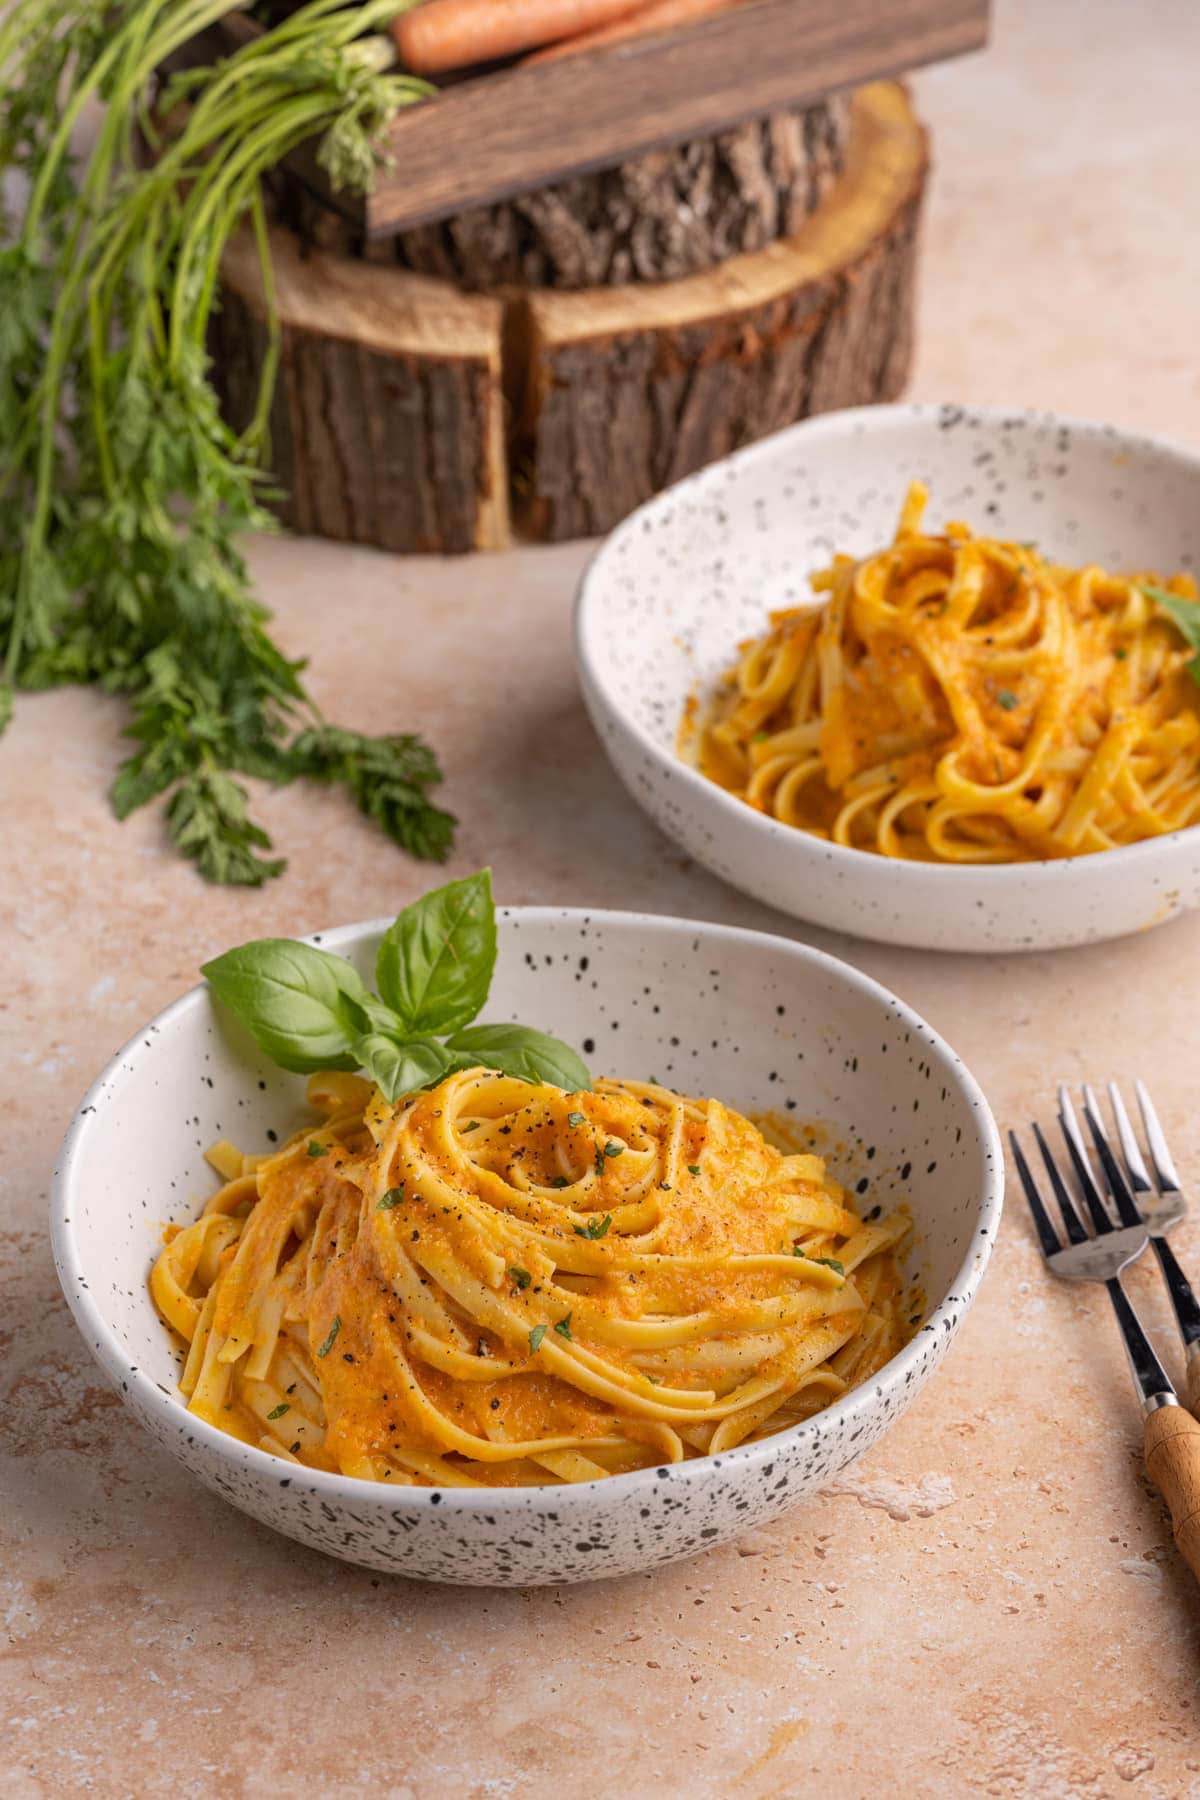 Two bowls of pasta with carrot sauce